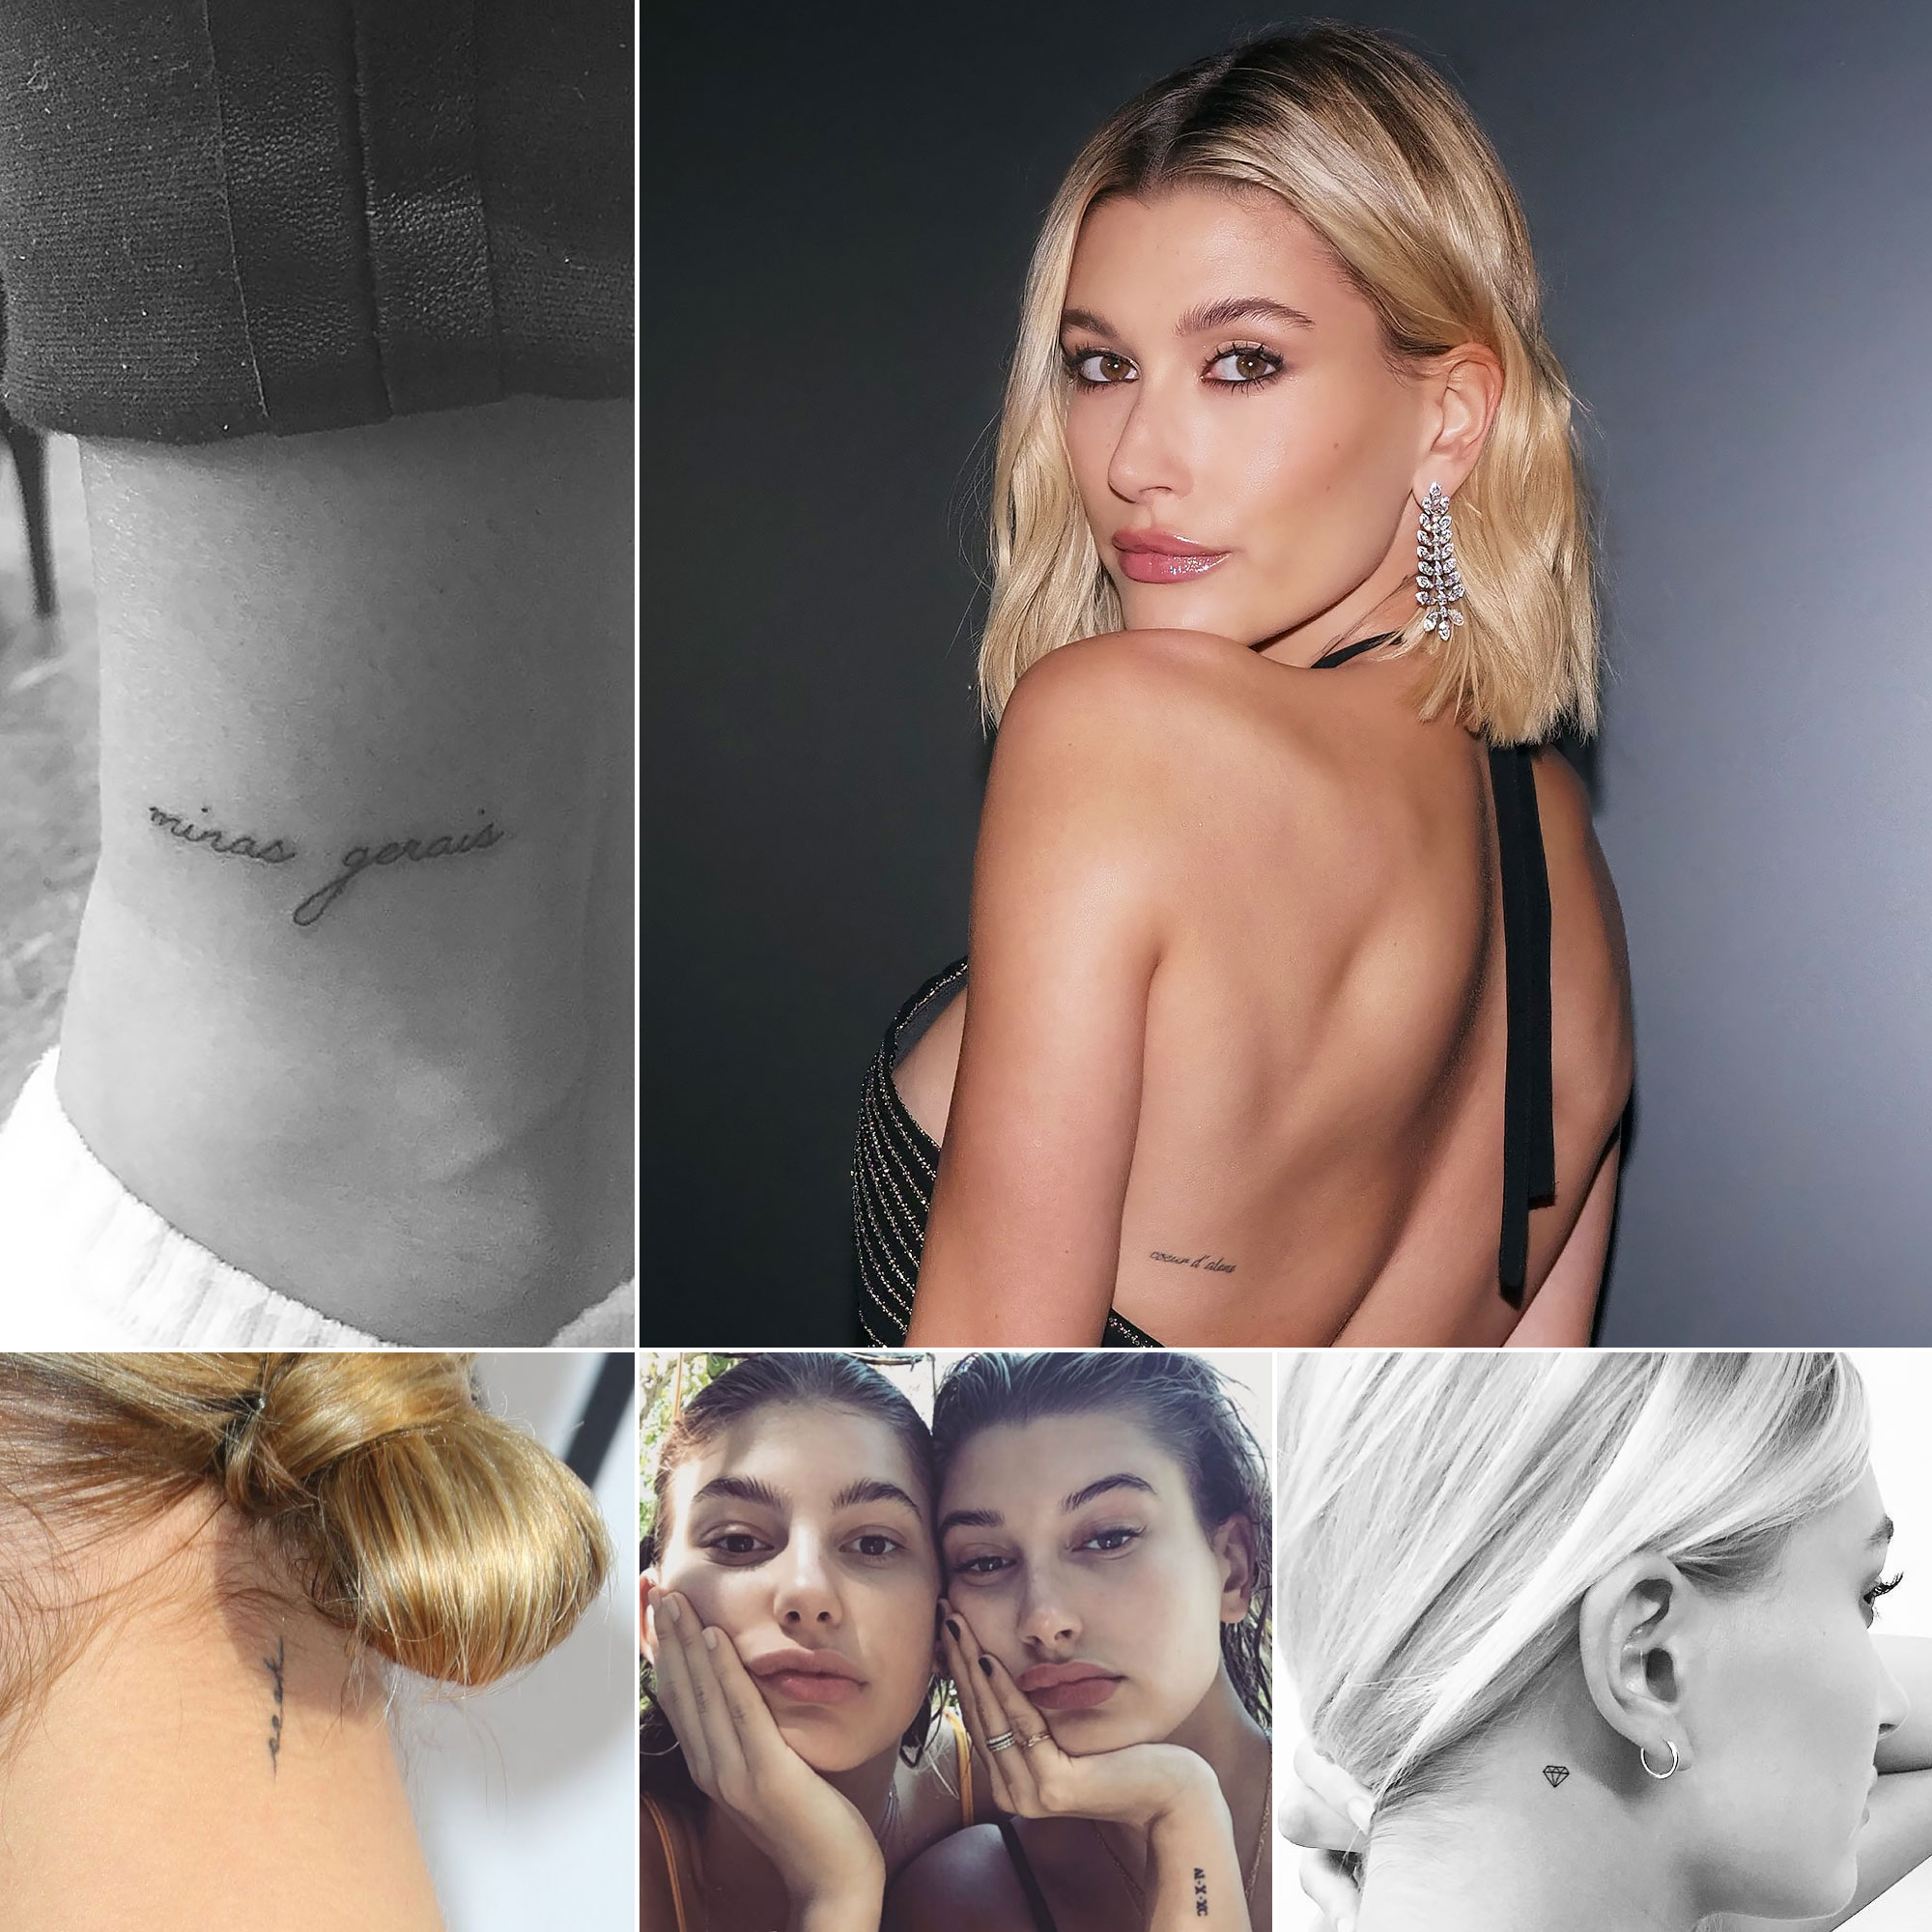 Selena Gomez And Hailey Bieber's Matching Tattoos Explained